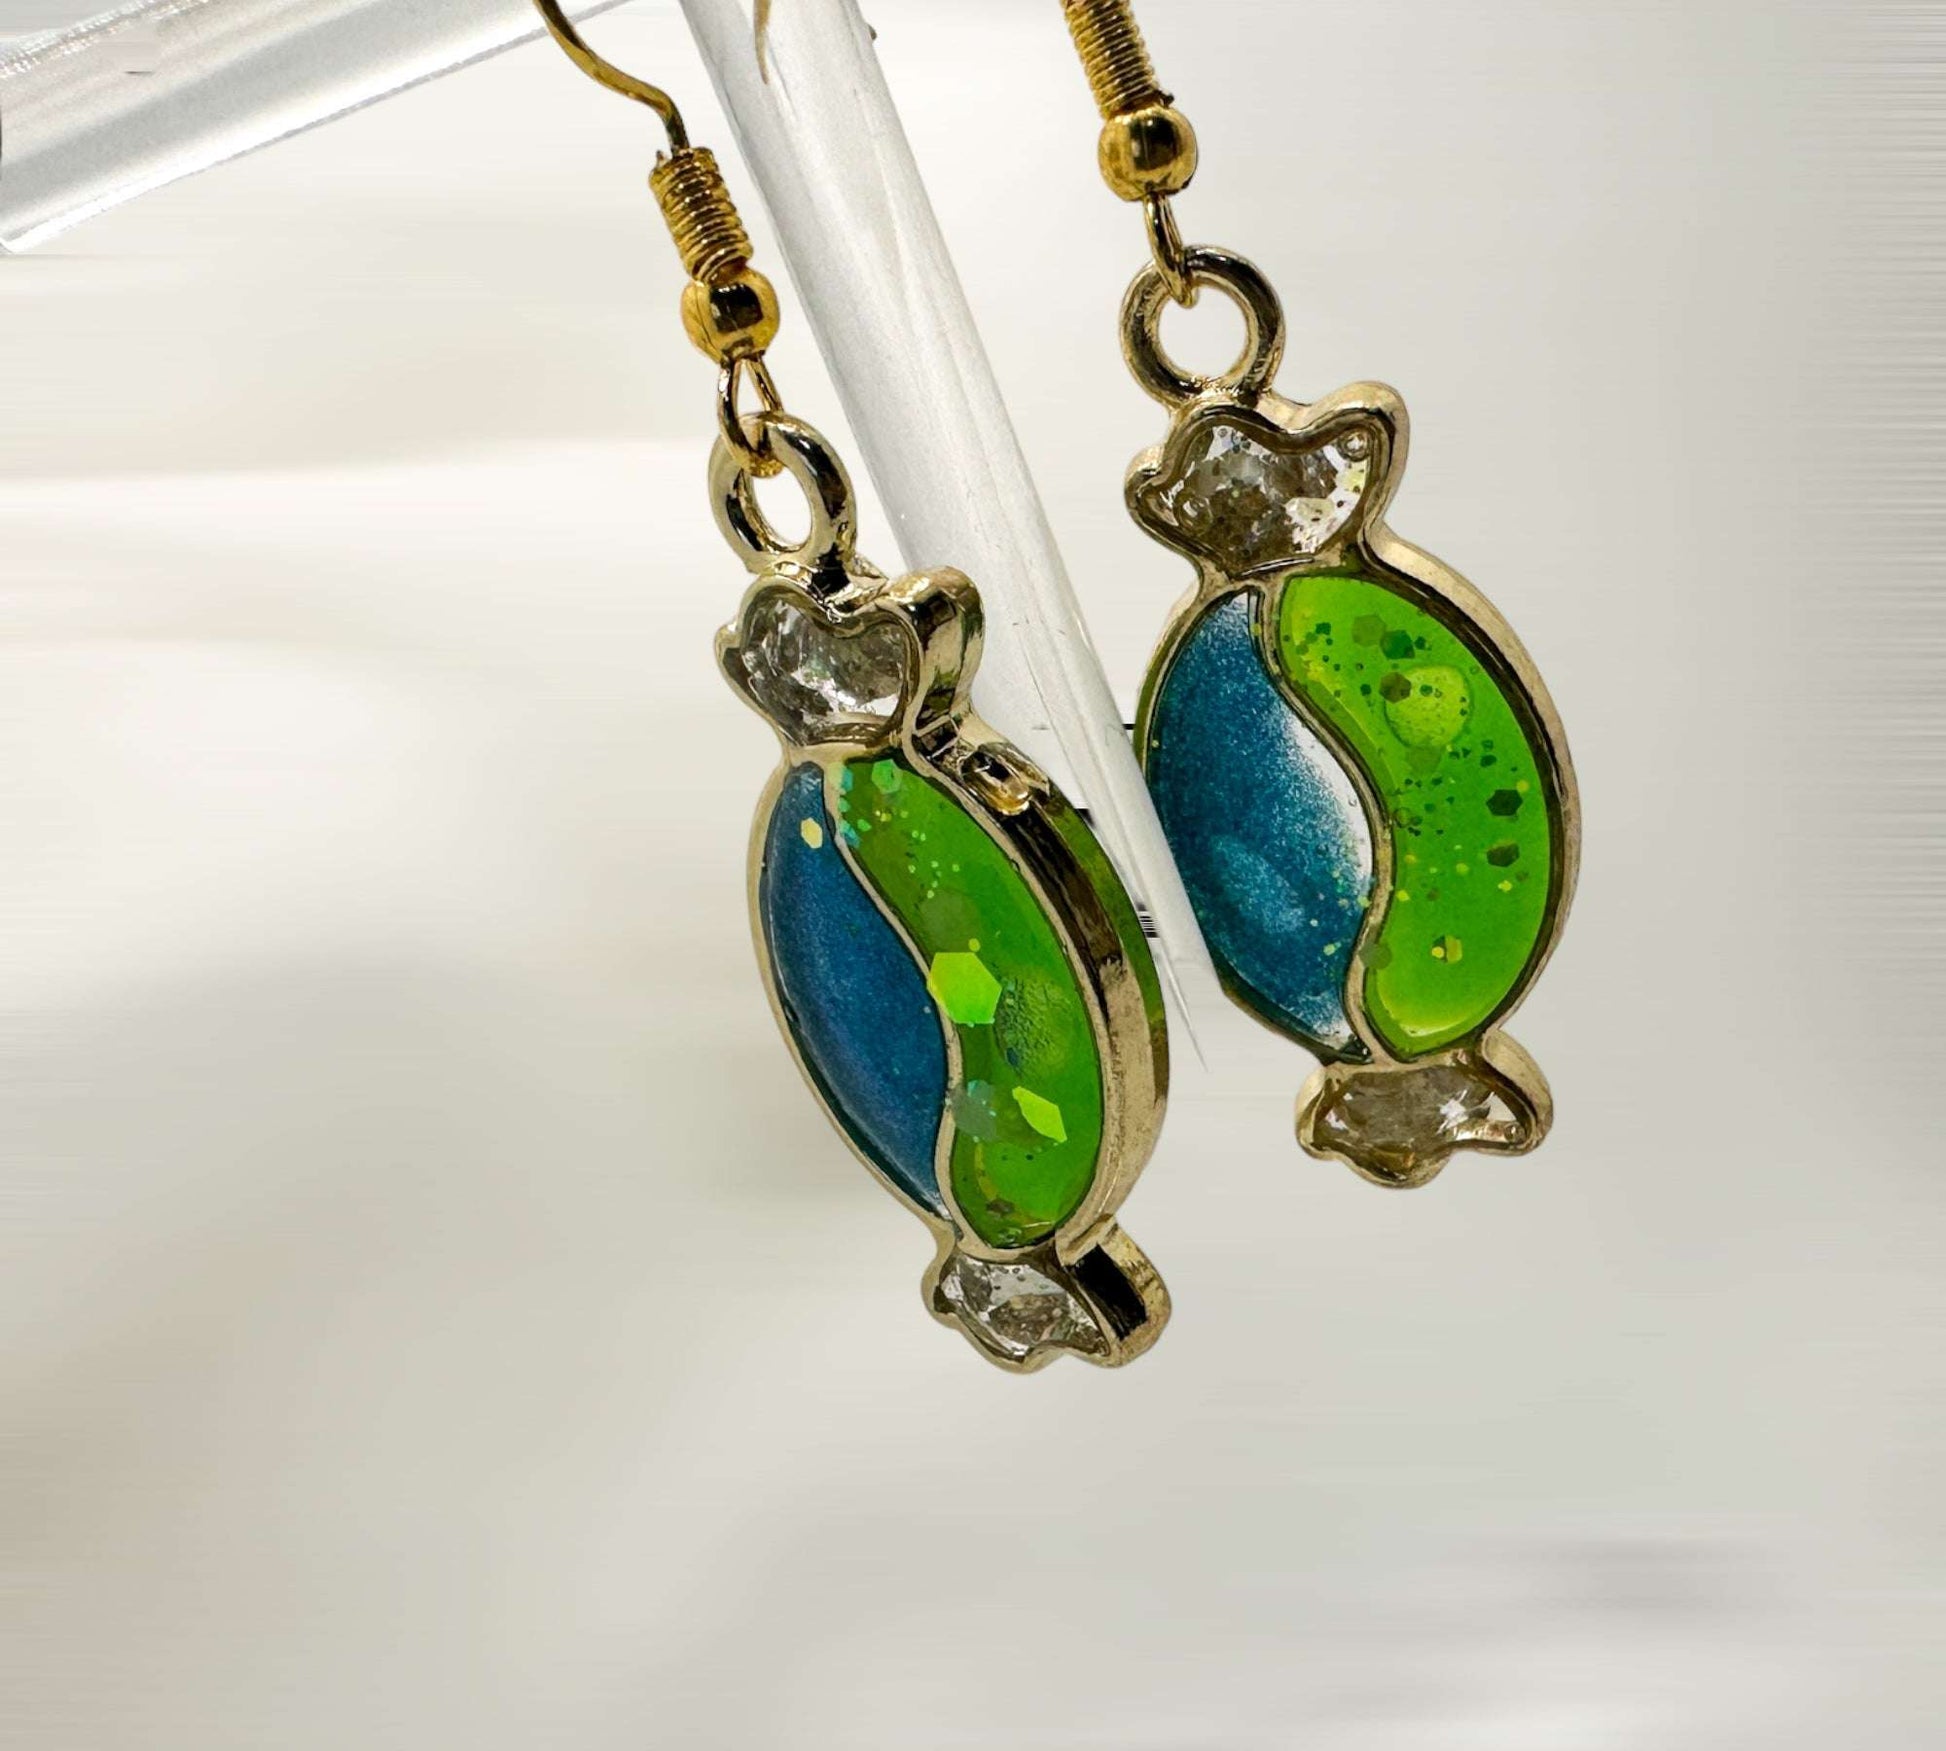 Candy Drop Whimsical Glow in the Dark Candy Drop Earrings